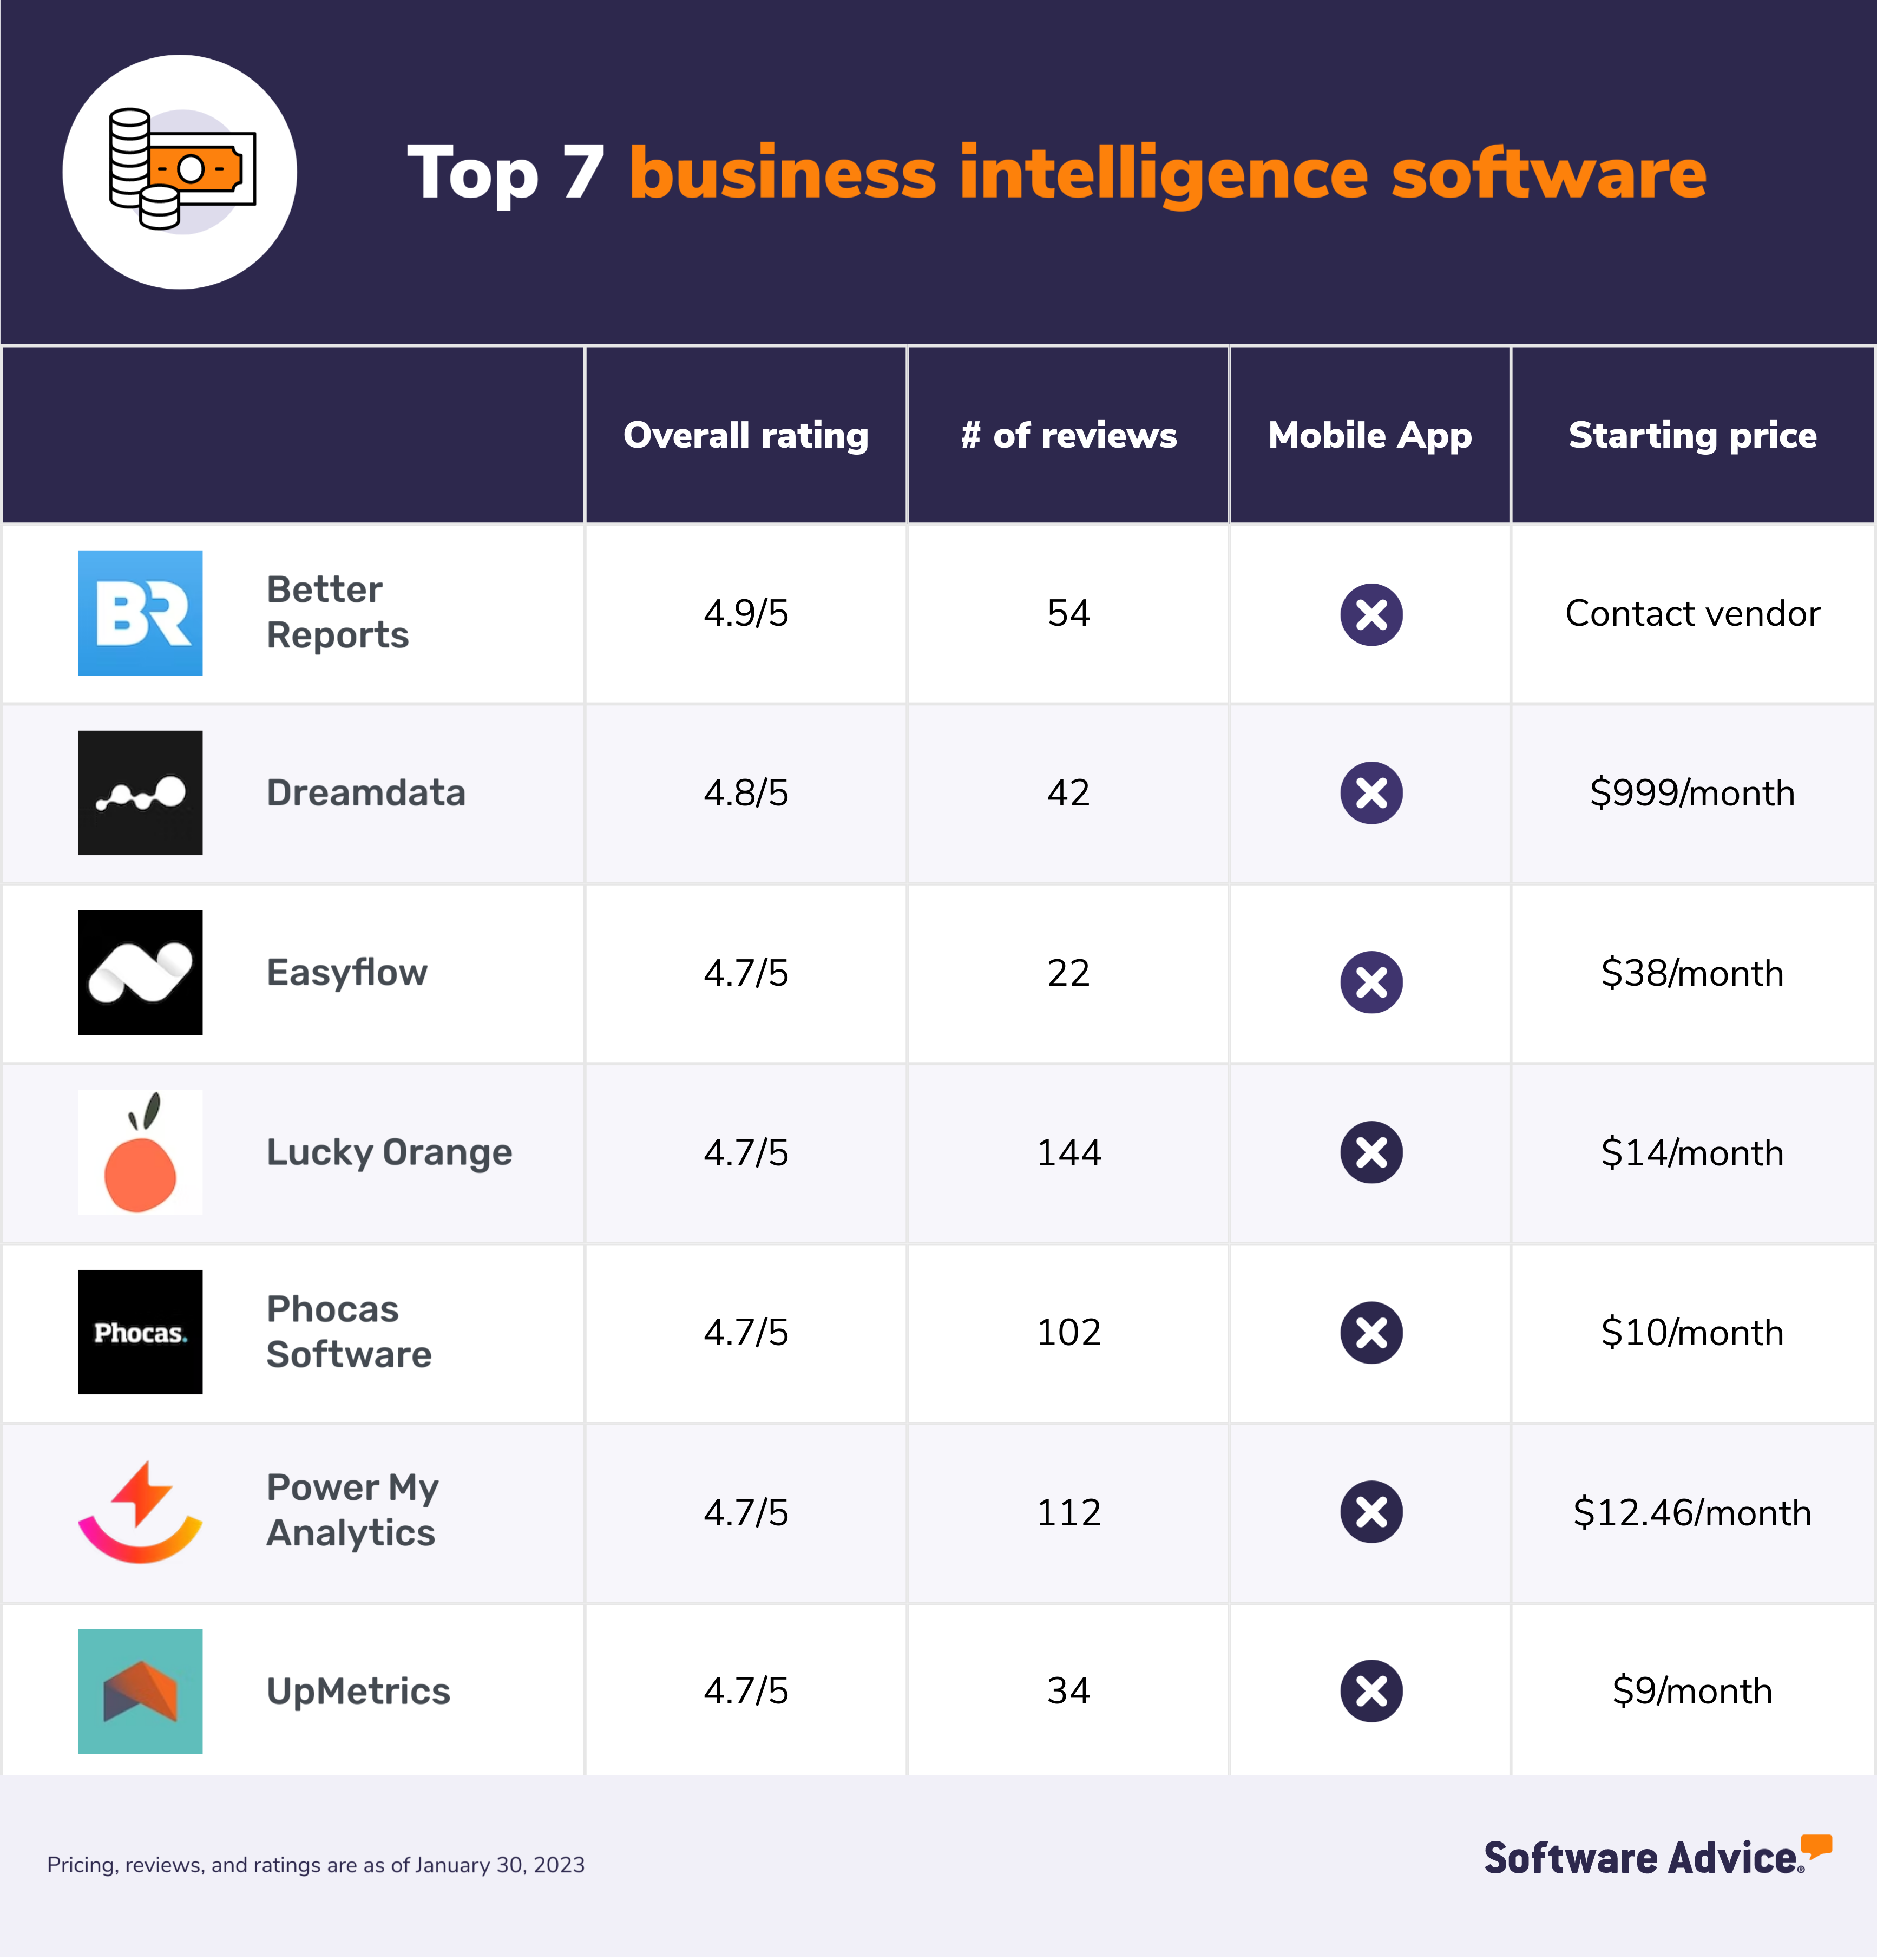 Top 7 business intelligence software